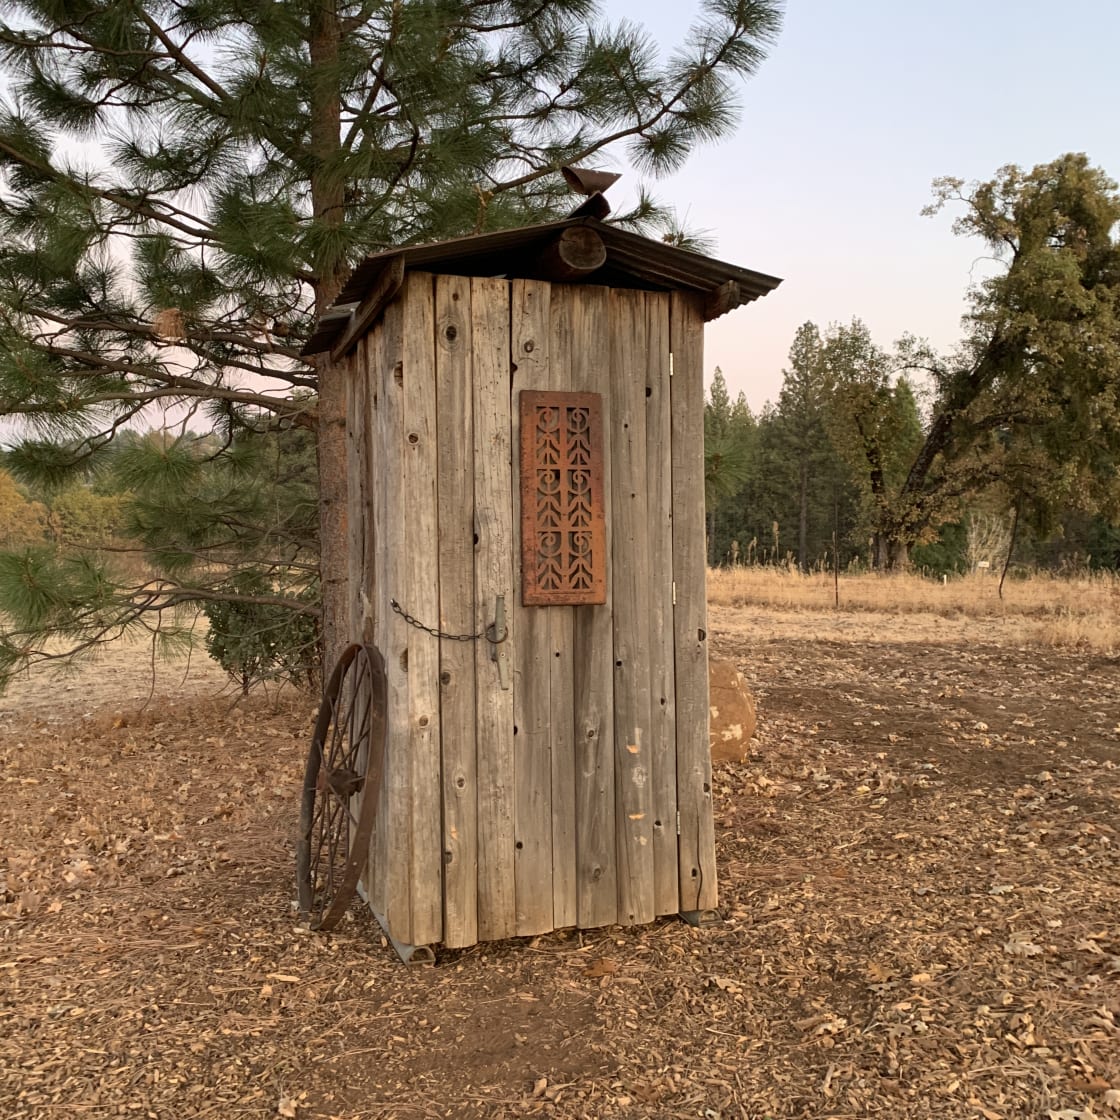 One of the outhouses.